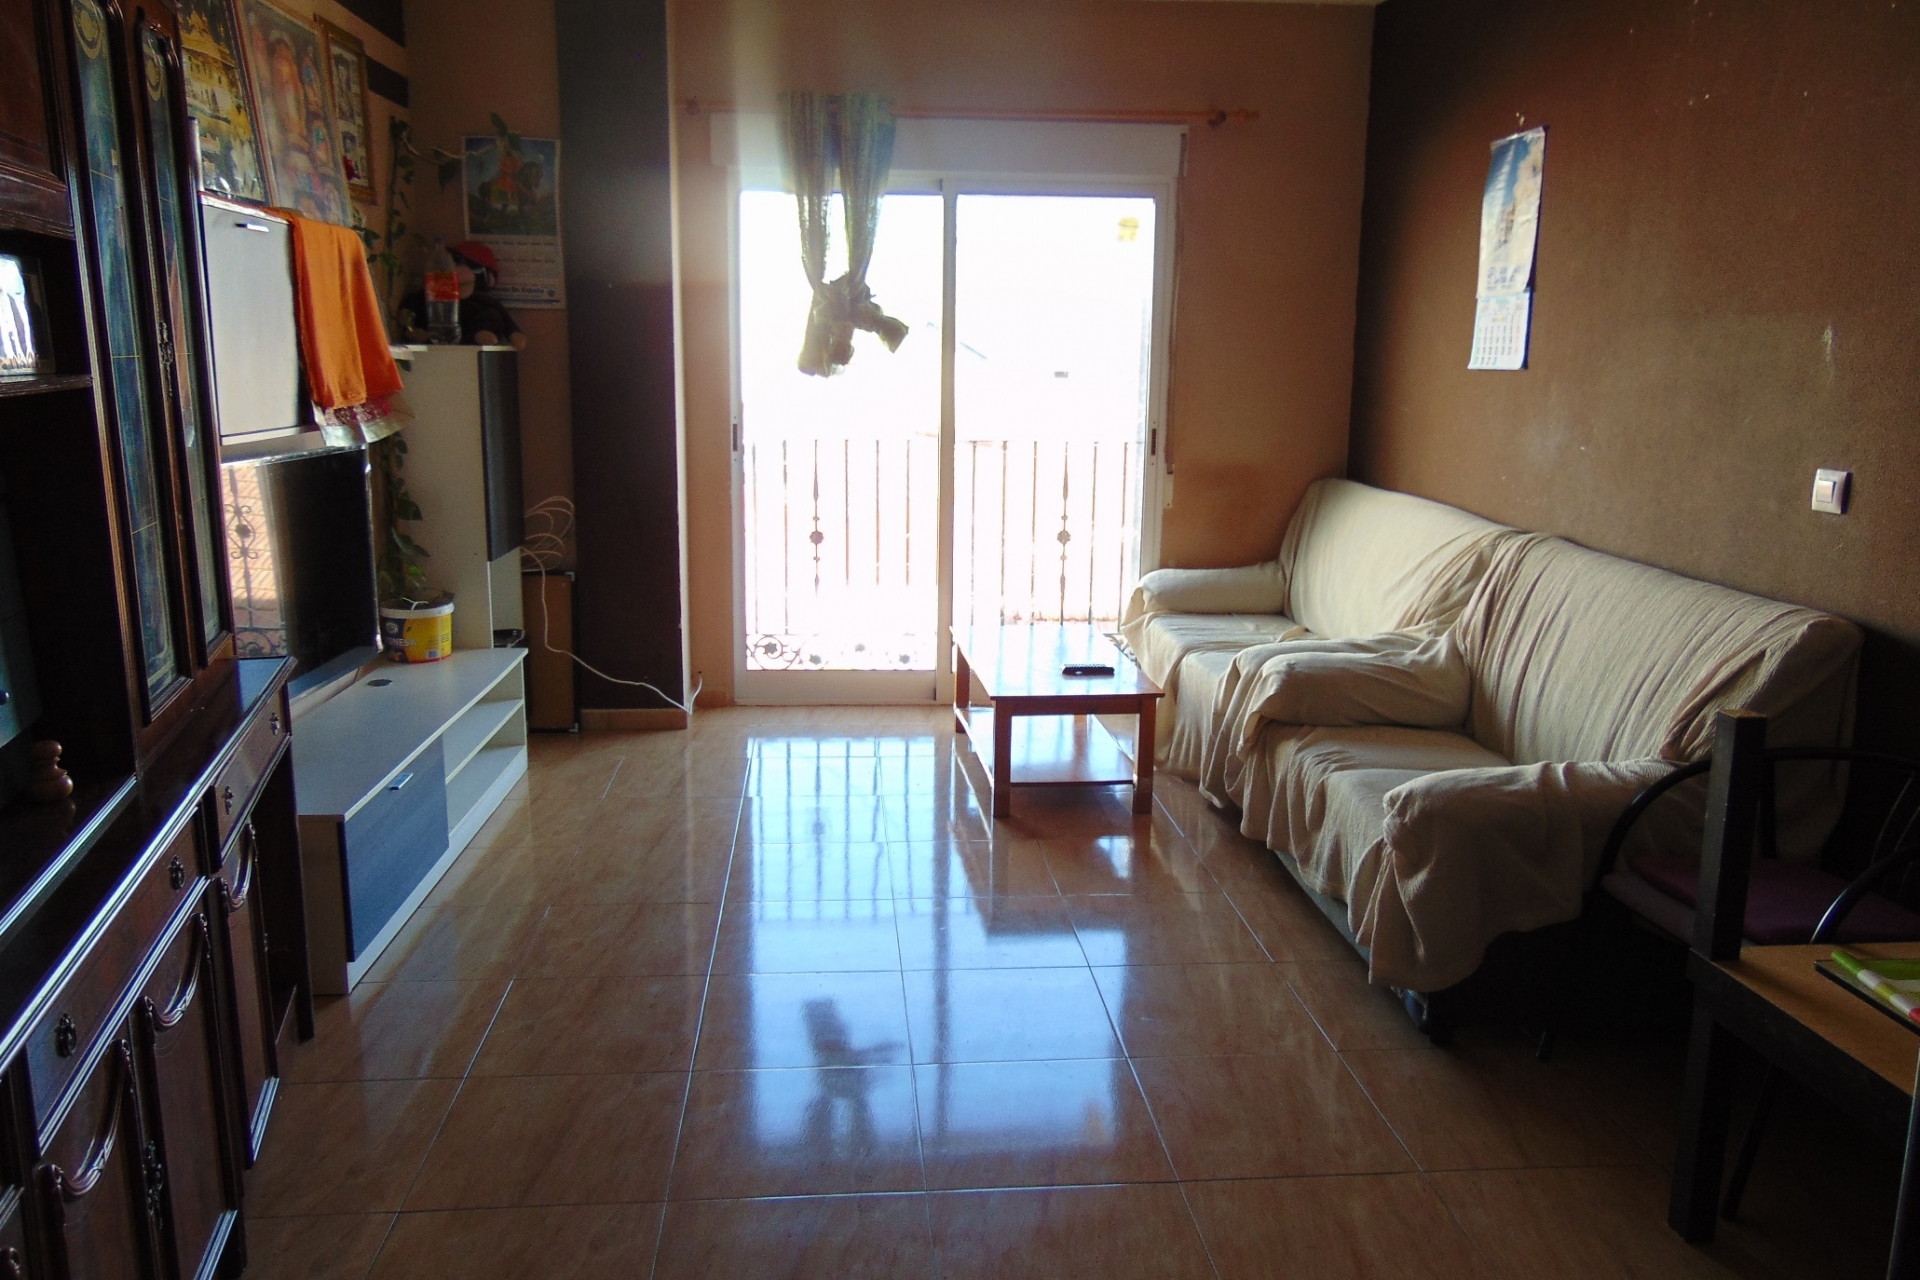 Property for sale - Apartment for sale - Torre Pacheco - Torre Pacheco Town